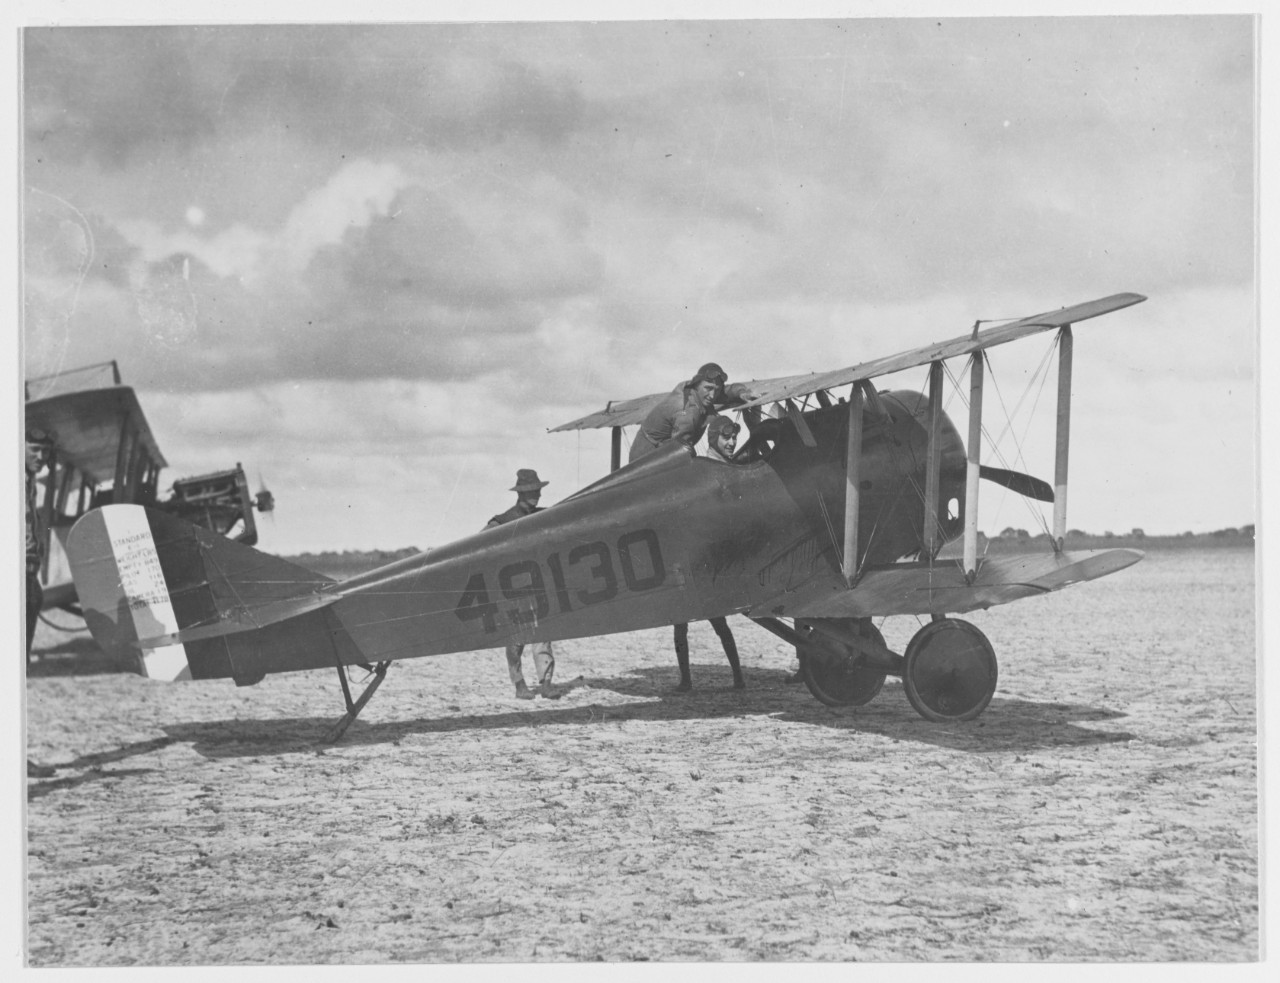 Standard E-1 Scout Army Airplane